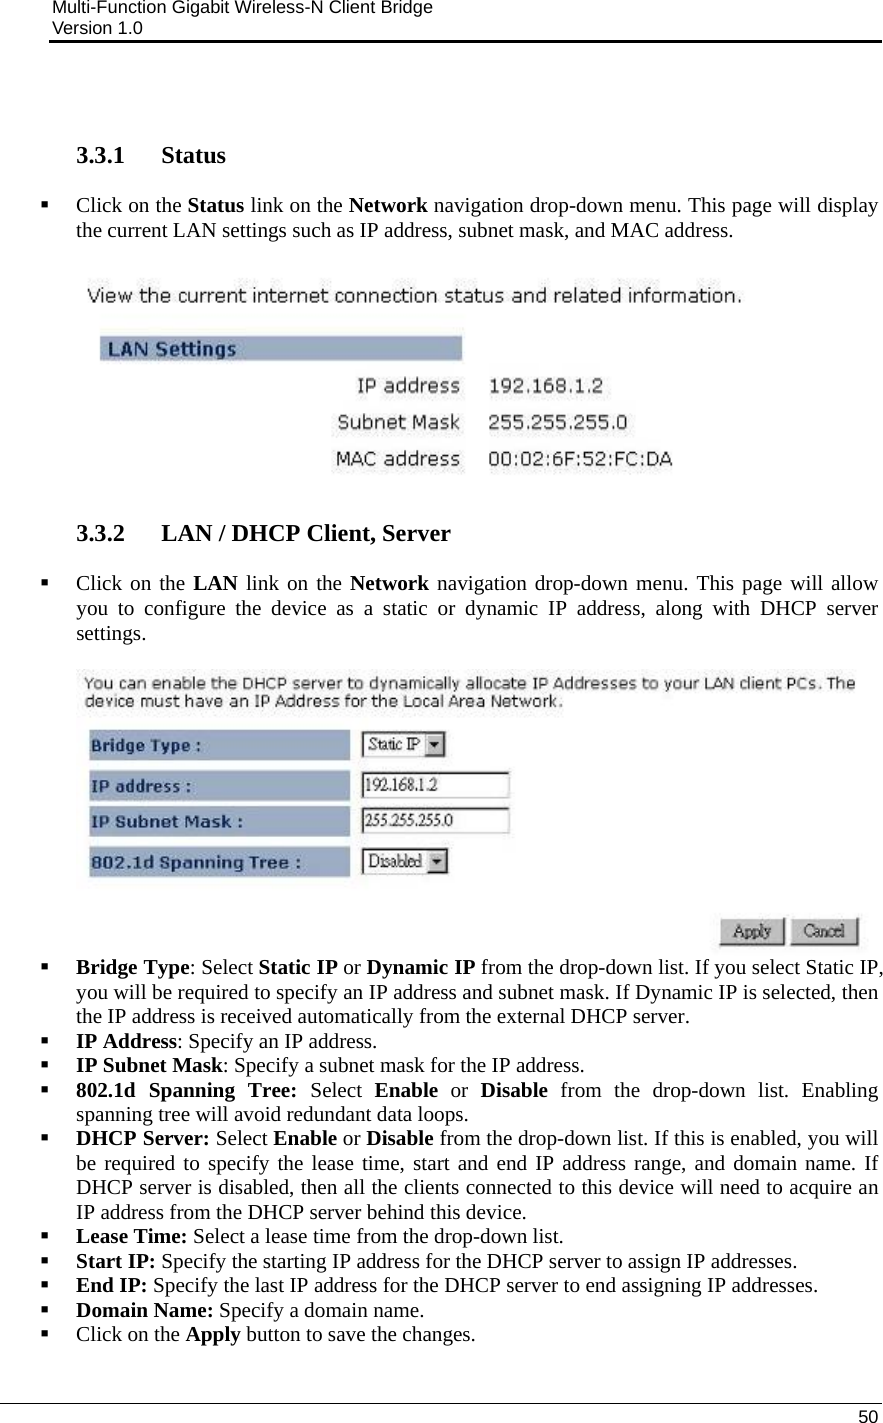 Multi-Function Gigabit Wireless-N Client Bridge                                         Version 1.0    50    3.3.1   Status  Click on the Status link on the Network navigation drop-down menu. This page will display the current LAN settings such as IP address, subnet mask, and MAC address.     3.3.2   LAN / DHCP Client, Server  Click on the LAN link on the Network navigation drop-down menu. This page will allow you to configure the device as a static or dynamic IP address, along with DHCP server settings.    Bridge Type: Select Static IP or Dynamic IP from the drop-down list. If you select Static IP, you will be required to specify an IP address and subnet mask. If Dynamic IP is selected, then the IP address is received automatically from the external DHCP server.  IP Address: Specify an IP address.  IP Subnet Mask: Specify a subnet mask for the IP address.  802.1d Spanning Tree: Select  Enable or Disable from the drop-down list. Enabling spanning tree will avoid redundant data loops.   DHCP Server: Select Enable or Disable from the drop-down list. If this is enabled, you will be required to specify the lease time, start and end IP address range, and domain name. If DHCP server is disabled, then all the clients connected to this device will need to acquire an IP address from the DHCP server behind this device.   Lease Time: Select a lease time from the drop-down list.  Start IP: Specify the starting IP address for the DHCP server to assign IP addresses.  End IP: Specify the last IP address for the DHCP server to end assigning IP addresses.   Domain Name: Specify a domain name.  Click on the Apply button to save the changes.   